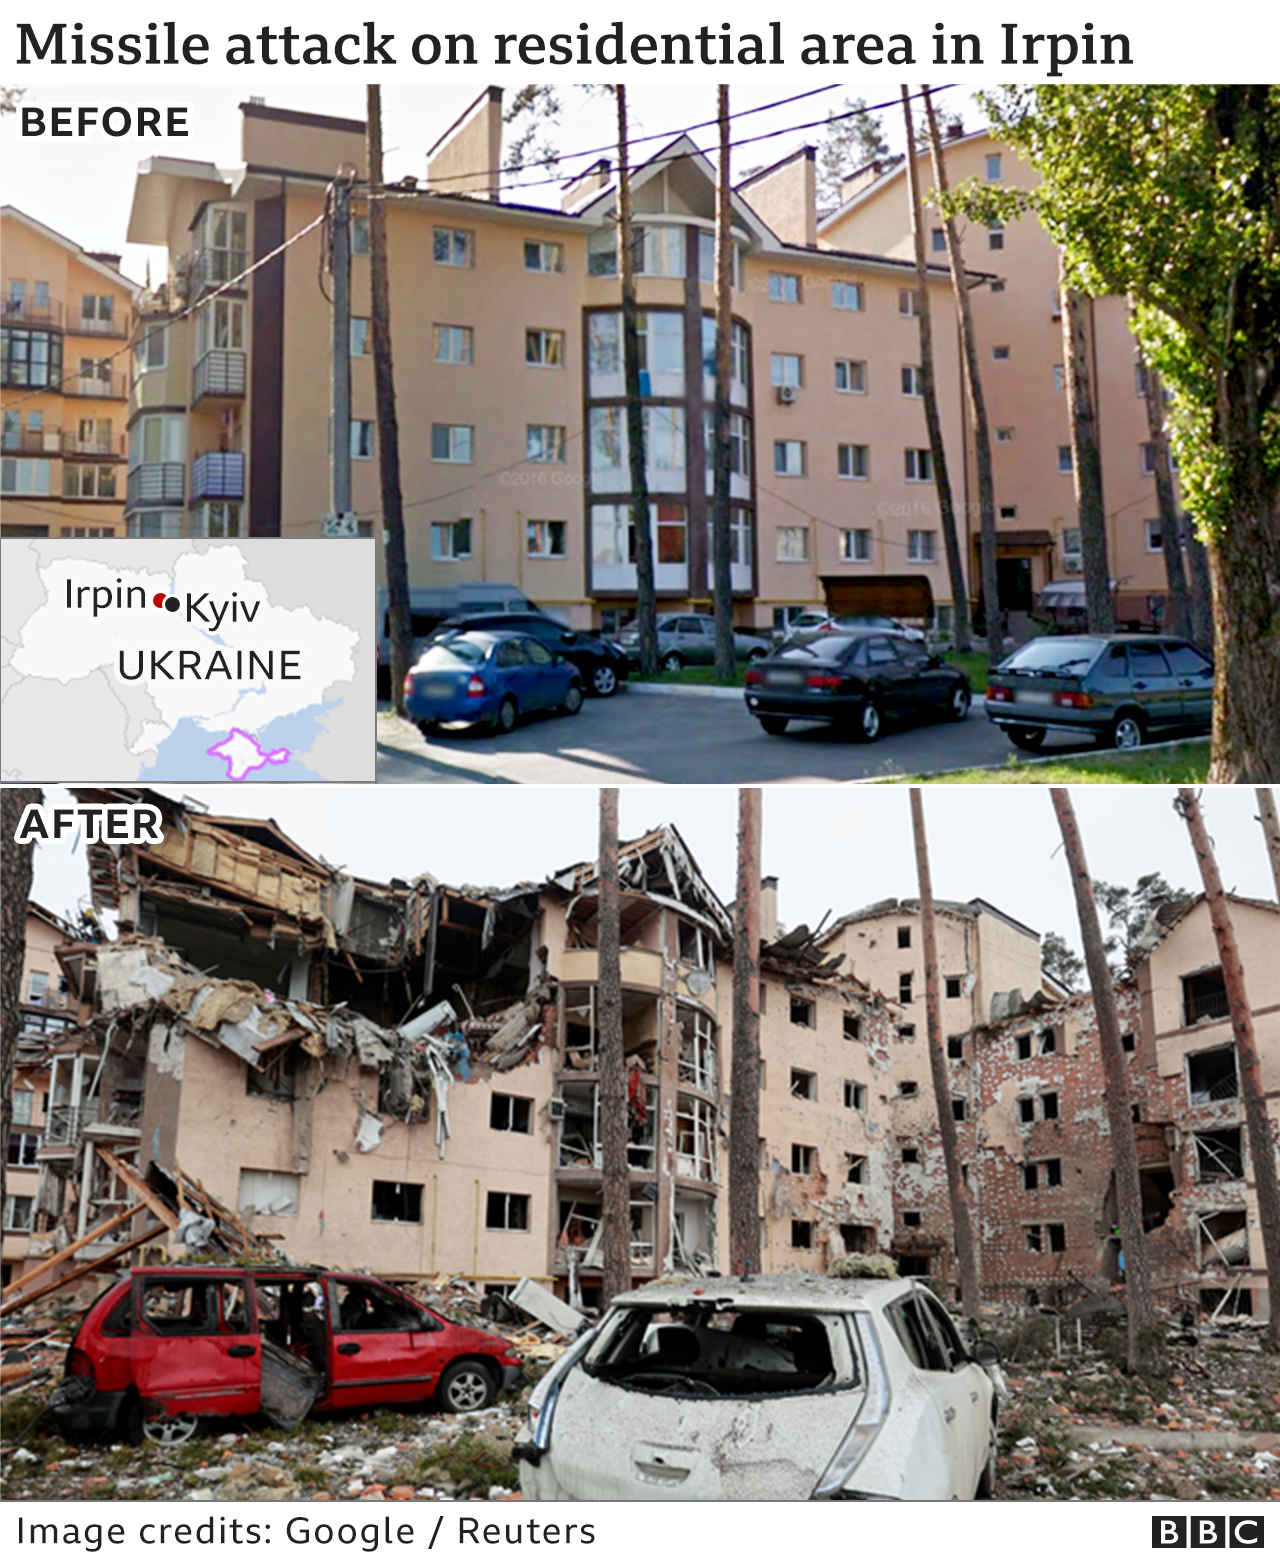 Images showing before and after an attack on Irpin in Ukraine